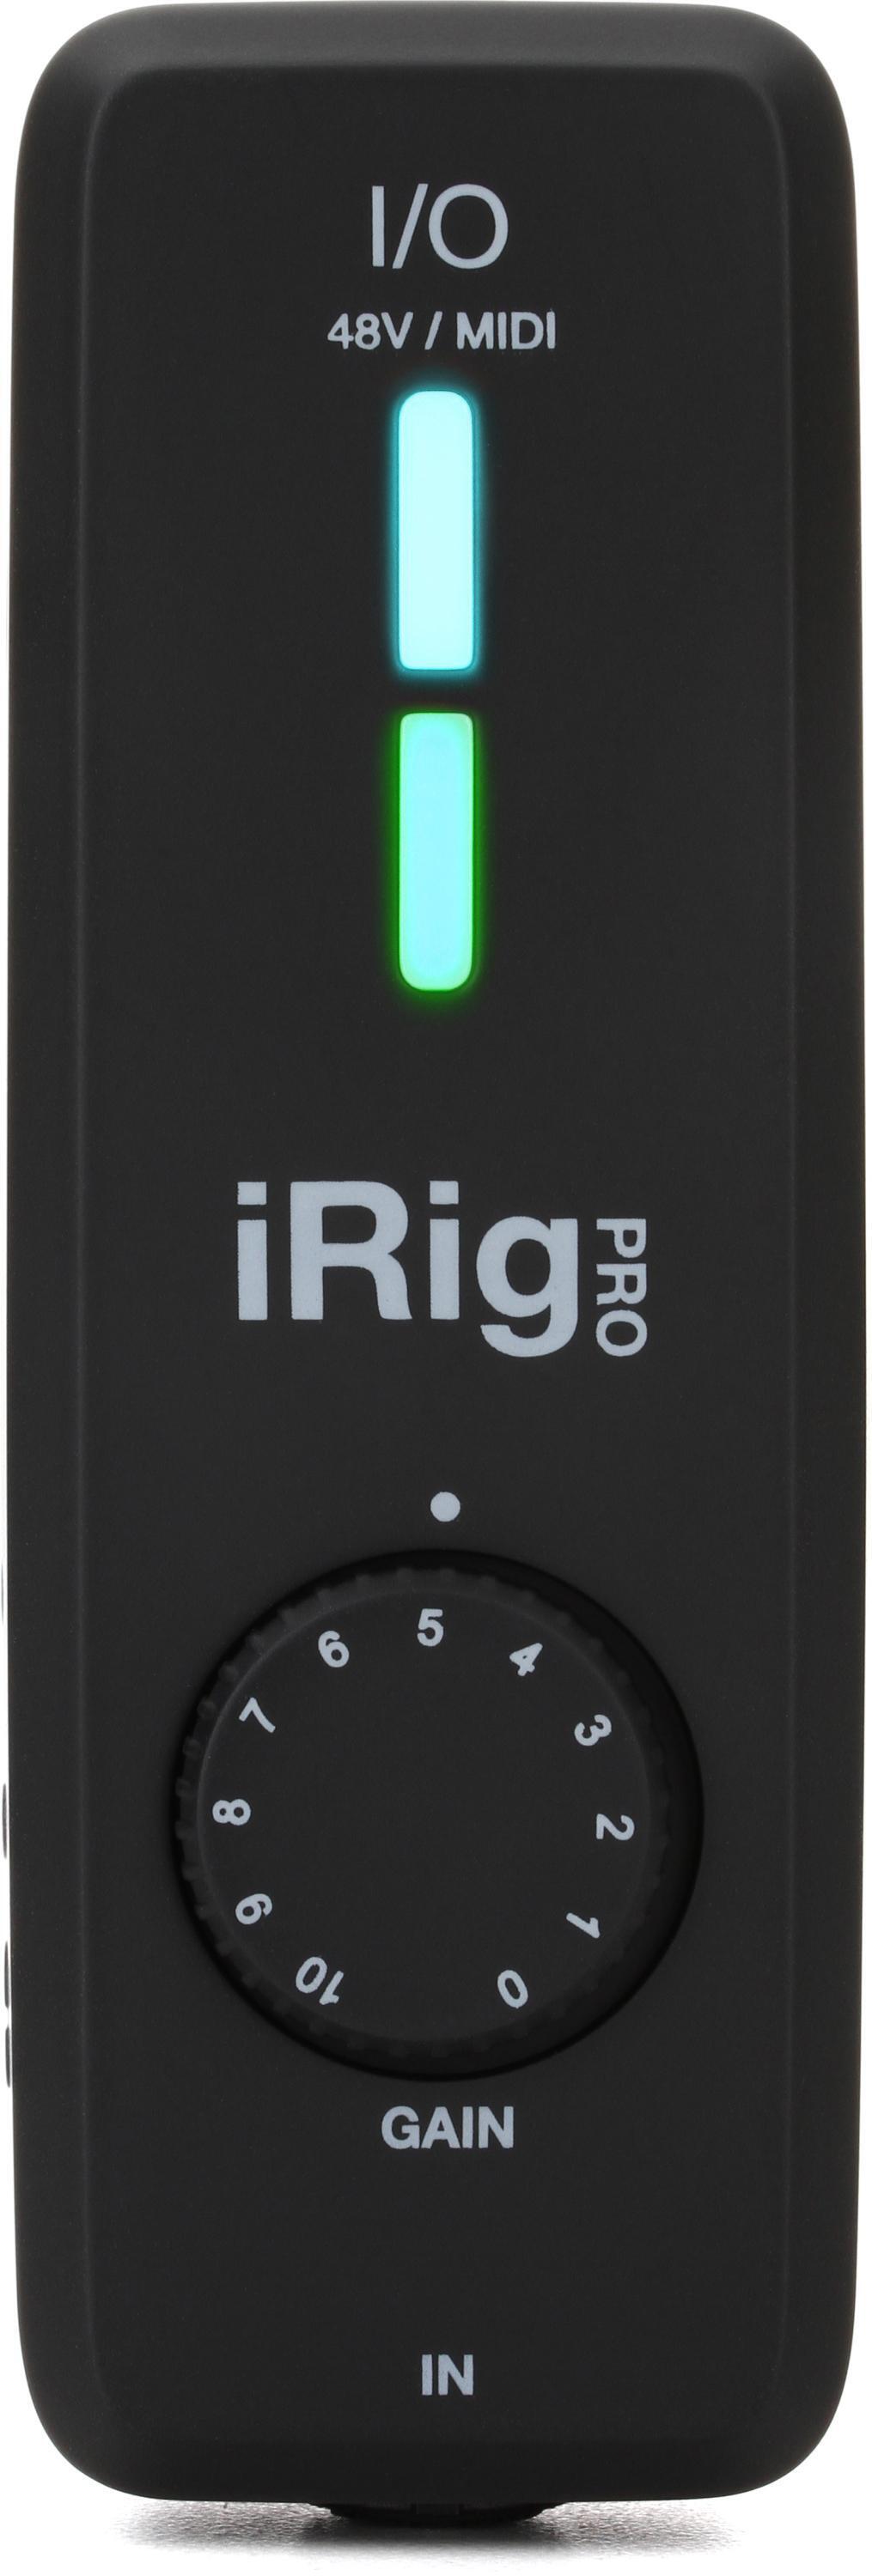 IK Multimedia iRig Pro I/O USB Audio Interface for iOS, Android, Mac, and PC